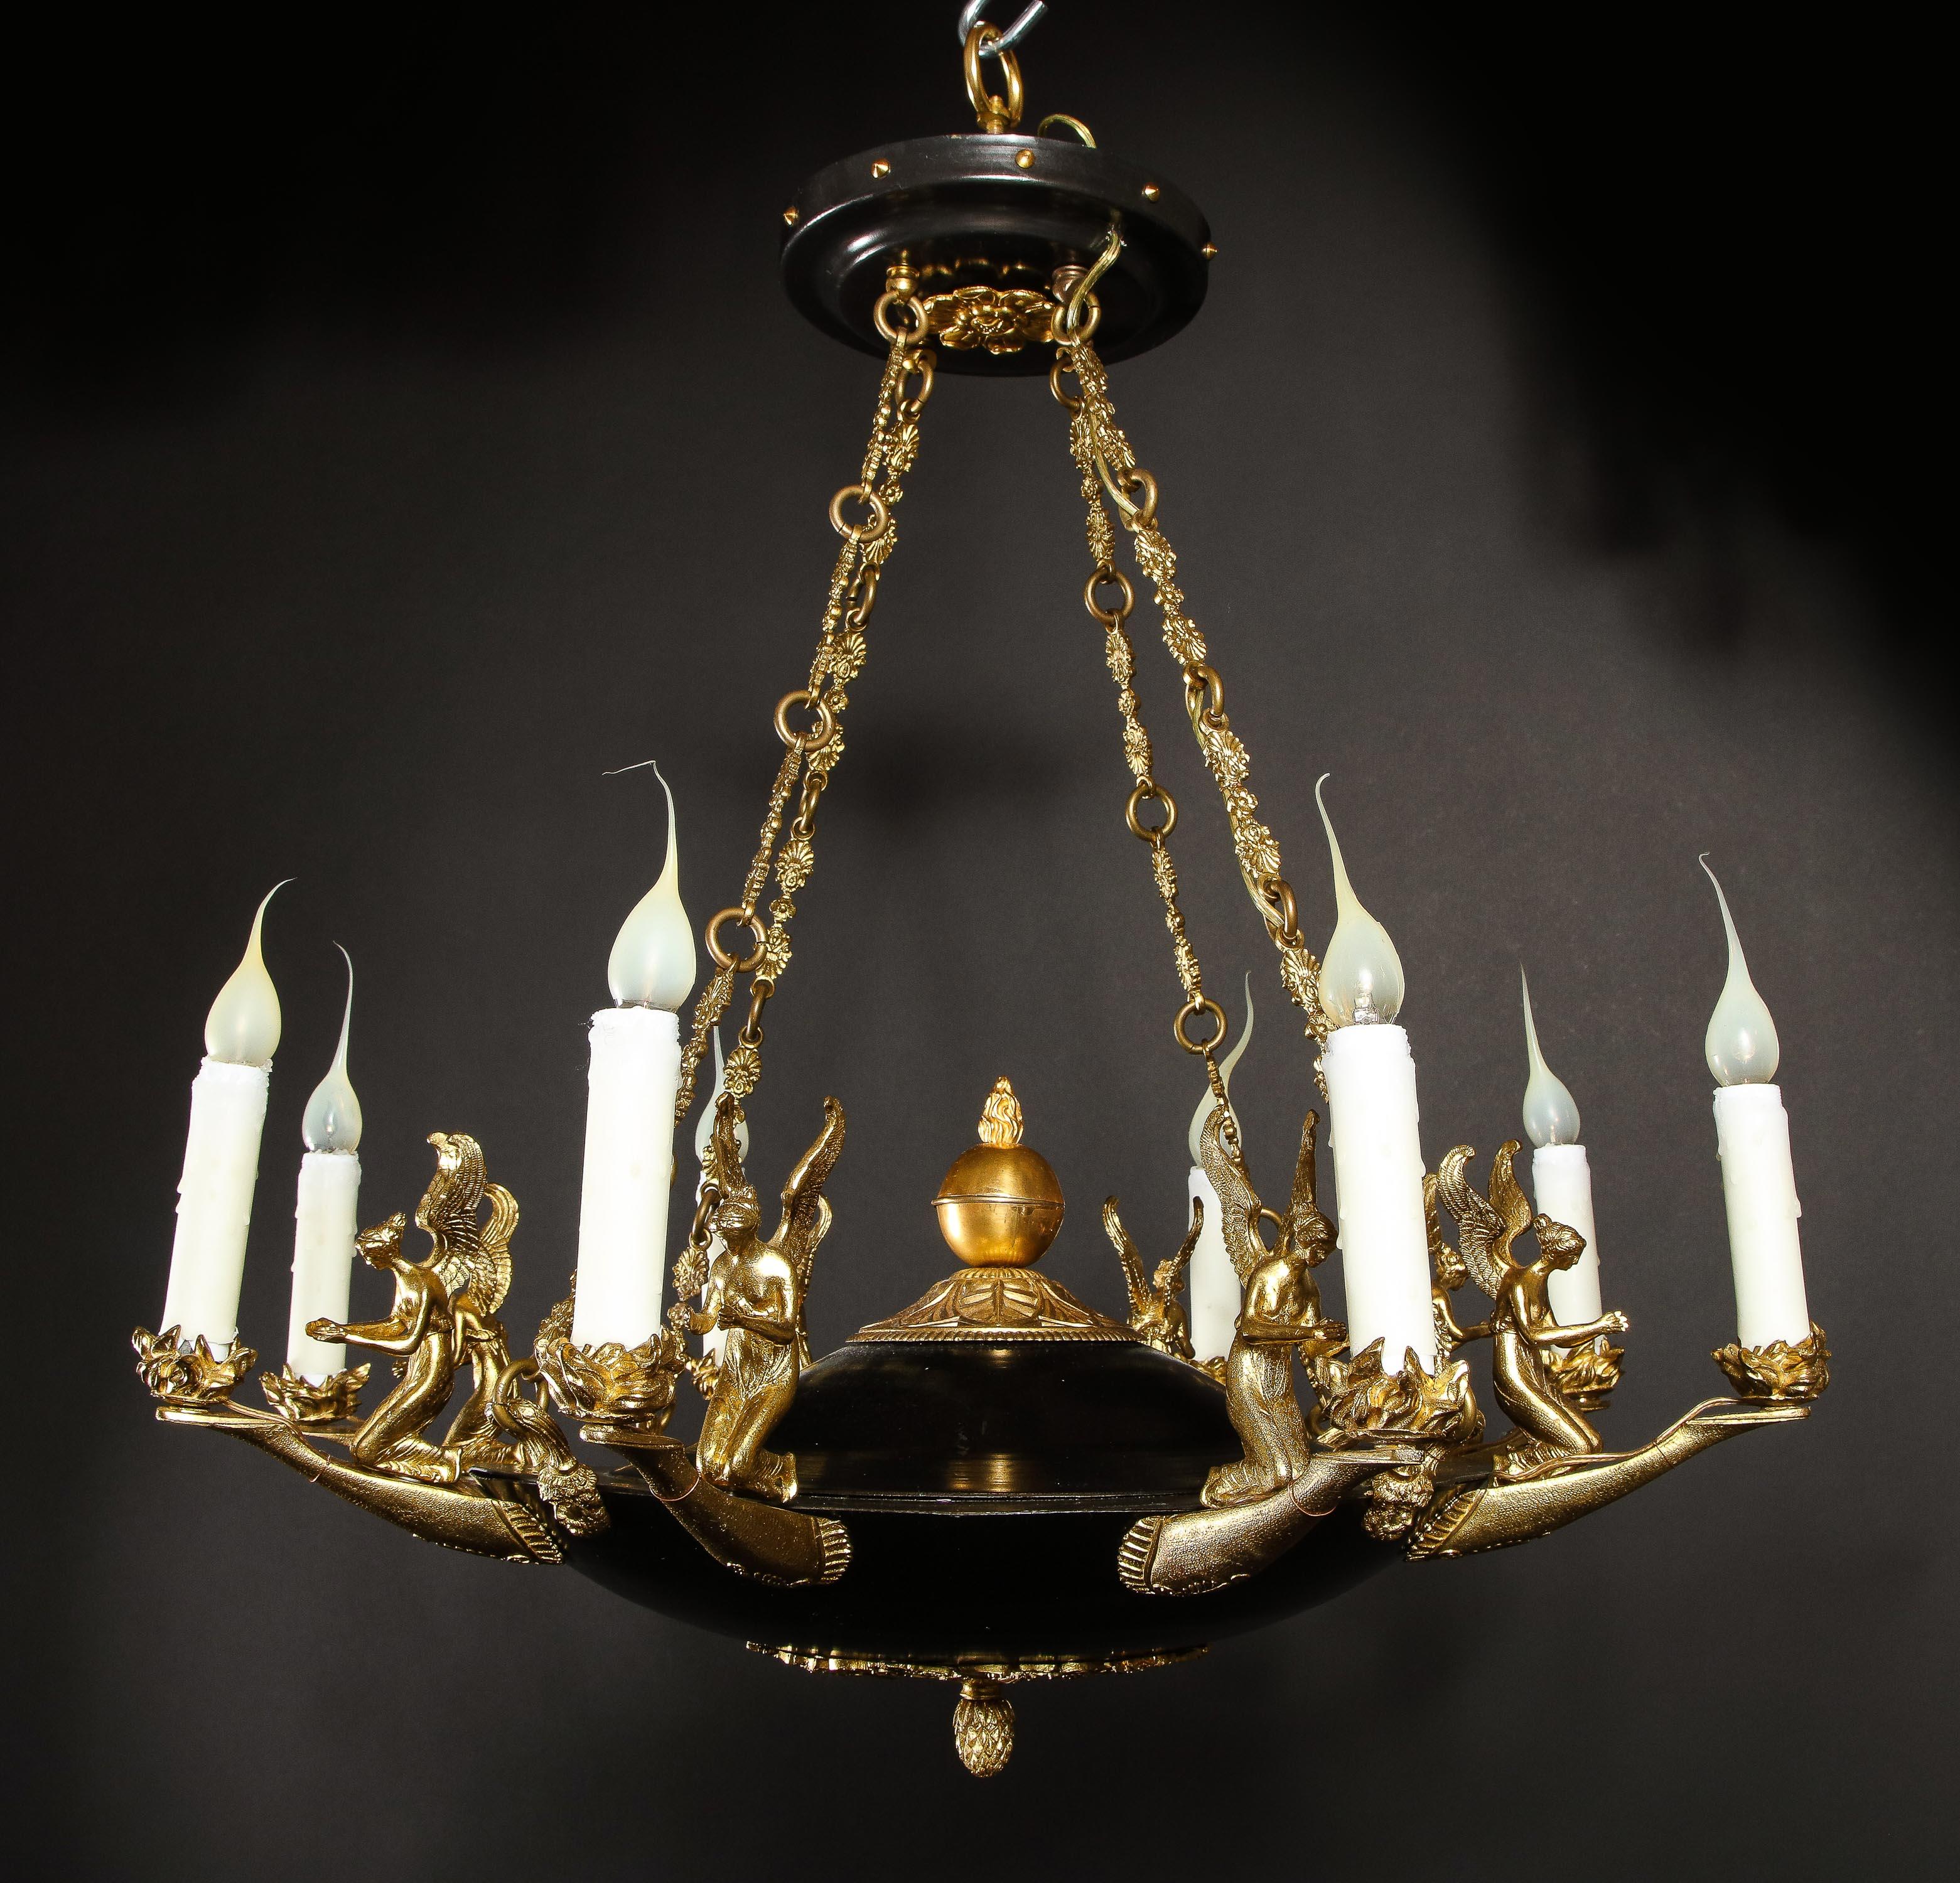 20th Century Pair of Antique French Empire Style Figural Gilt & Patina Bronze Chandeliers For Sale